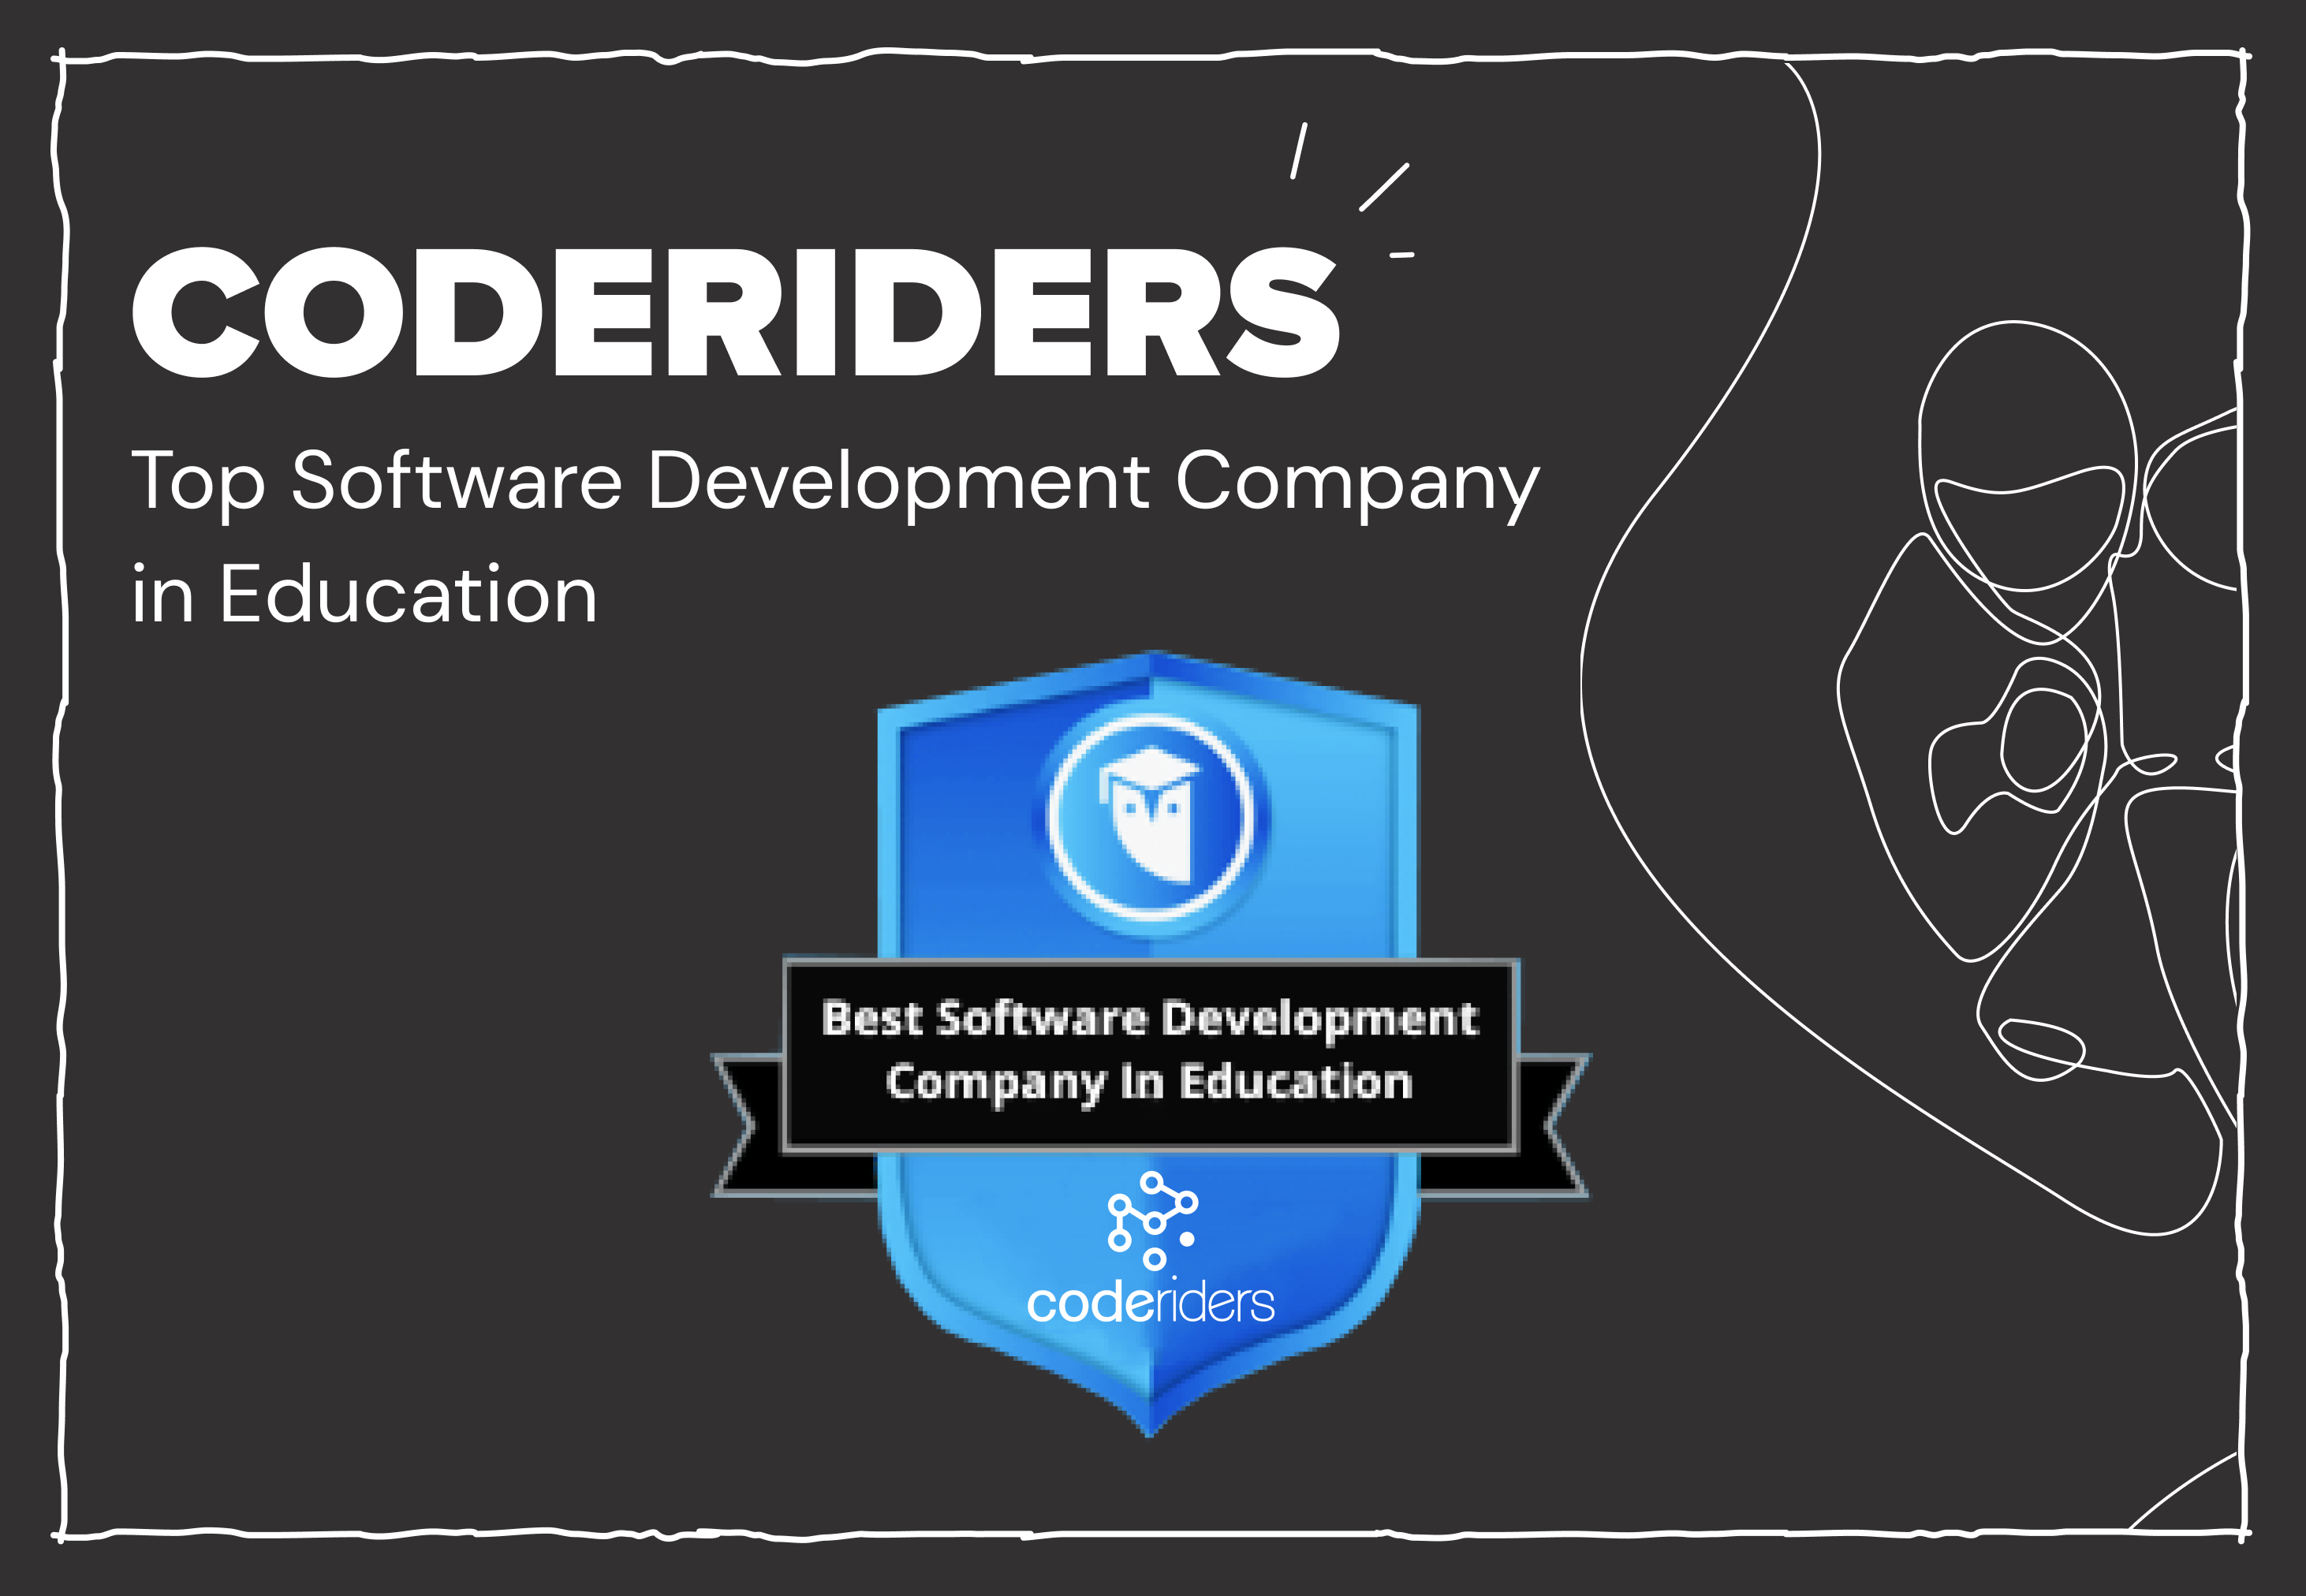 CodeRiders is listed among best software development companies in education or best edTech companies